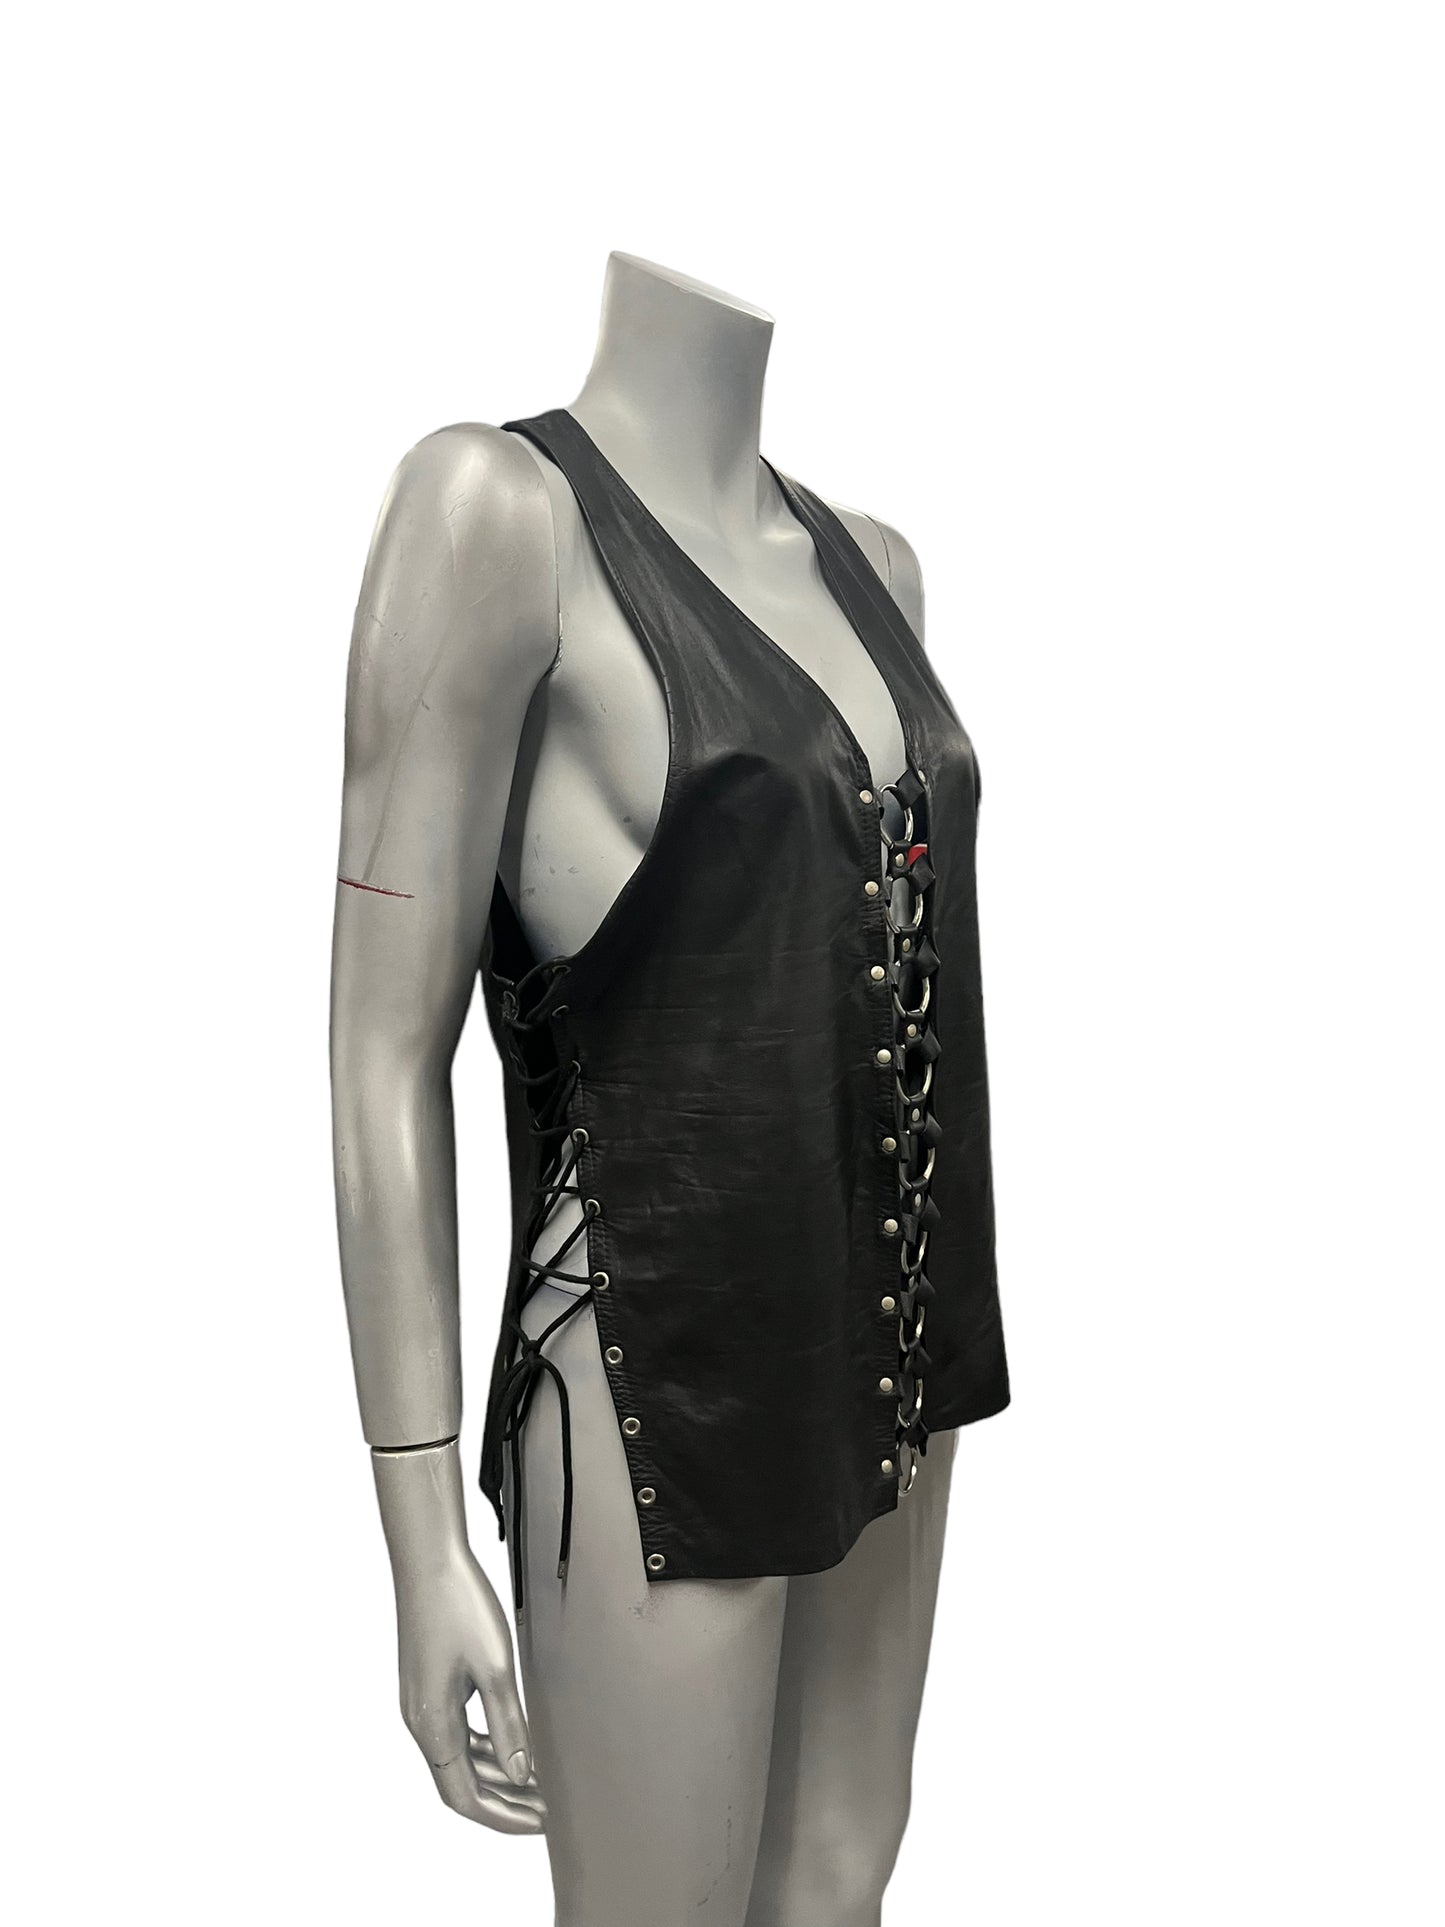 LL89 - Leather Top With Strings - Size L